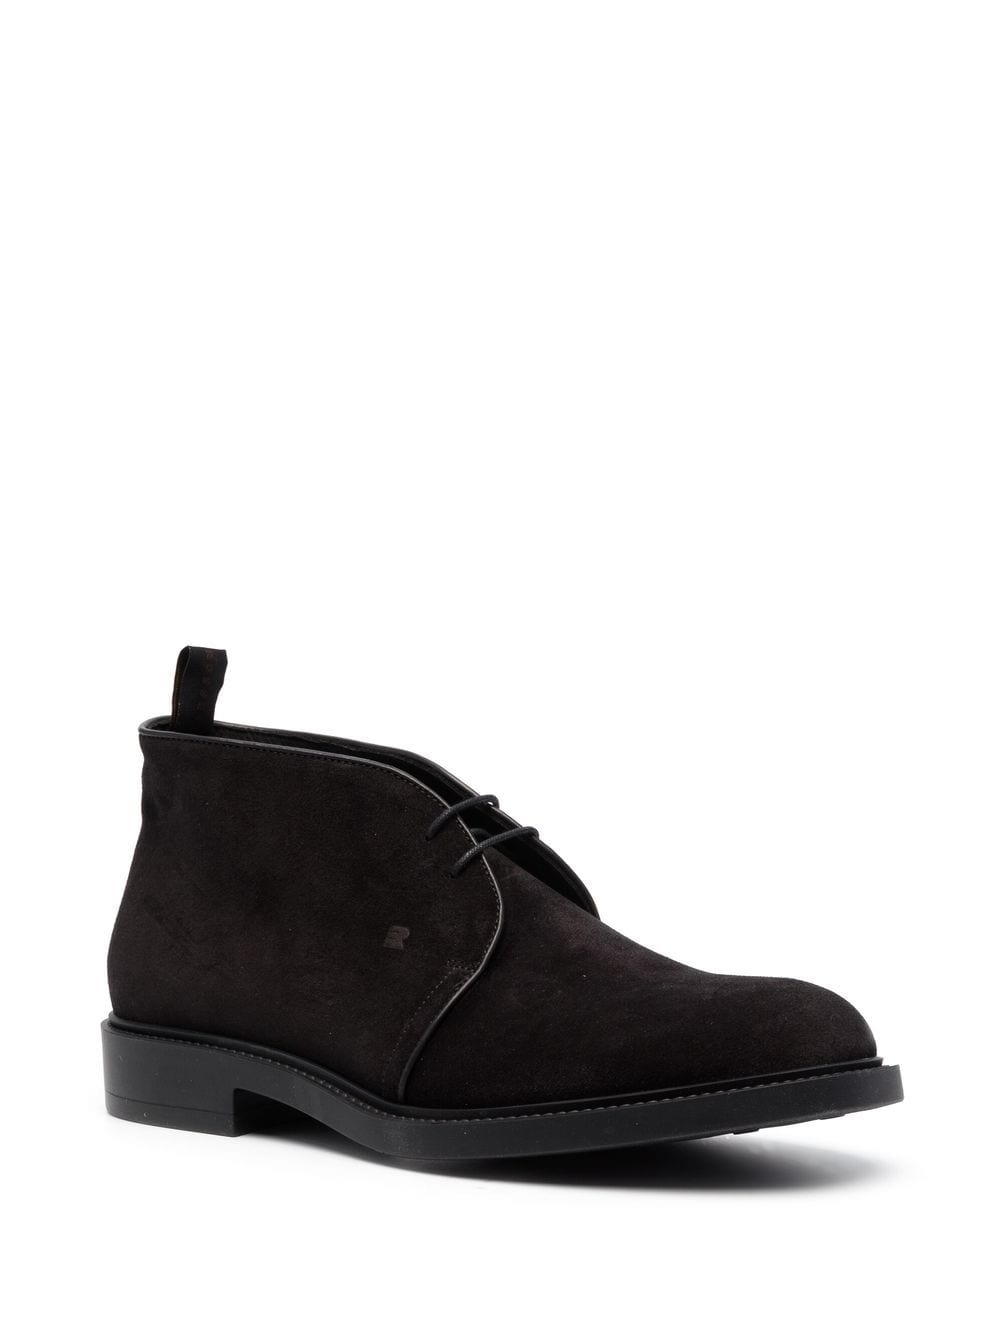 Image 2 of Fratelli Rossetti suede chukka boots